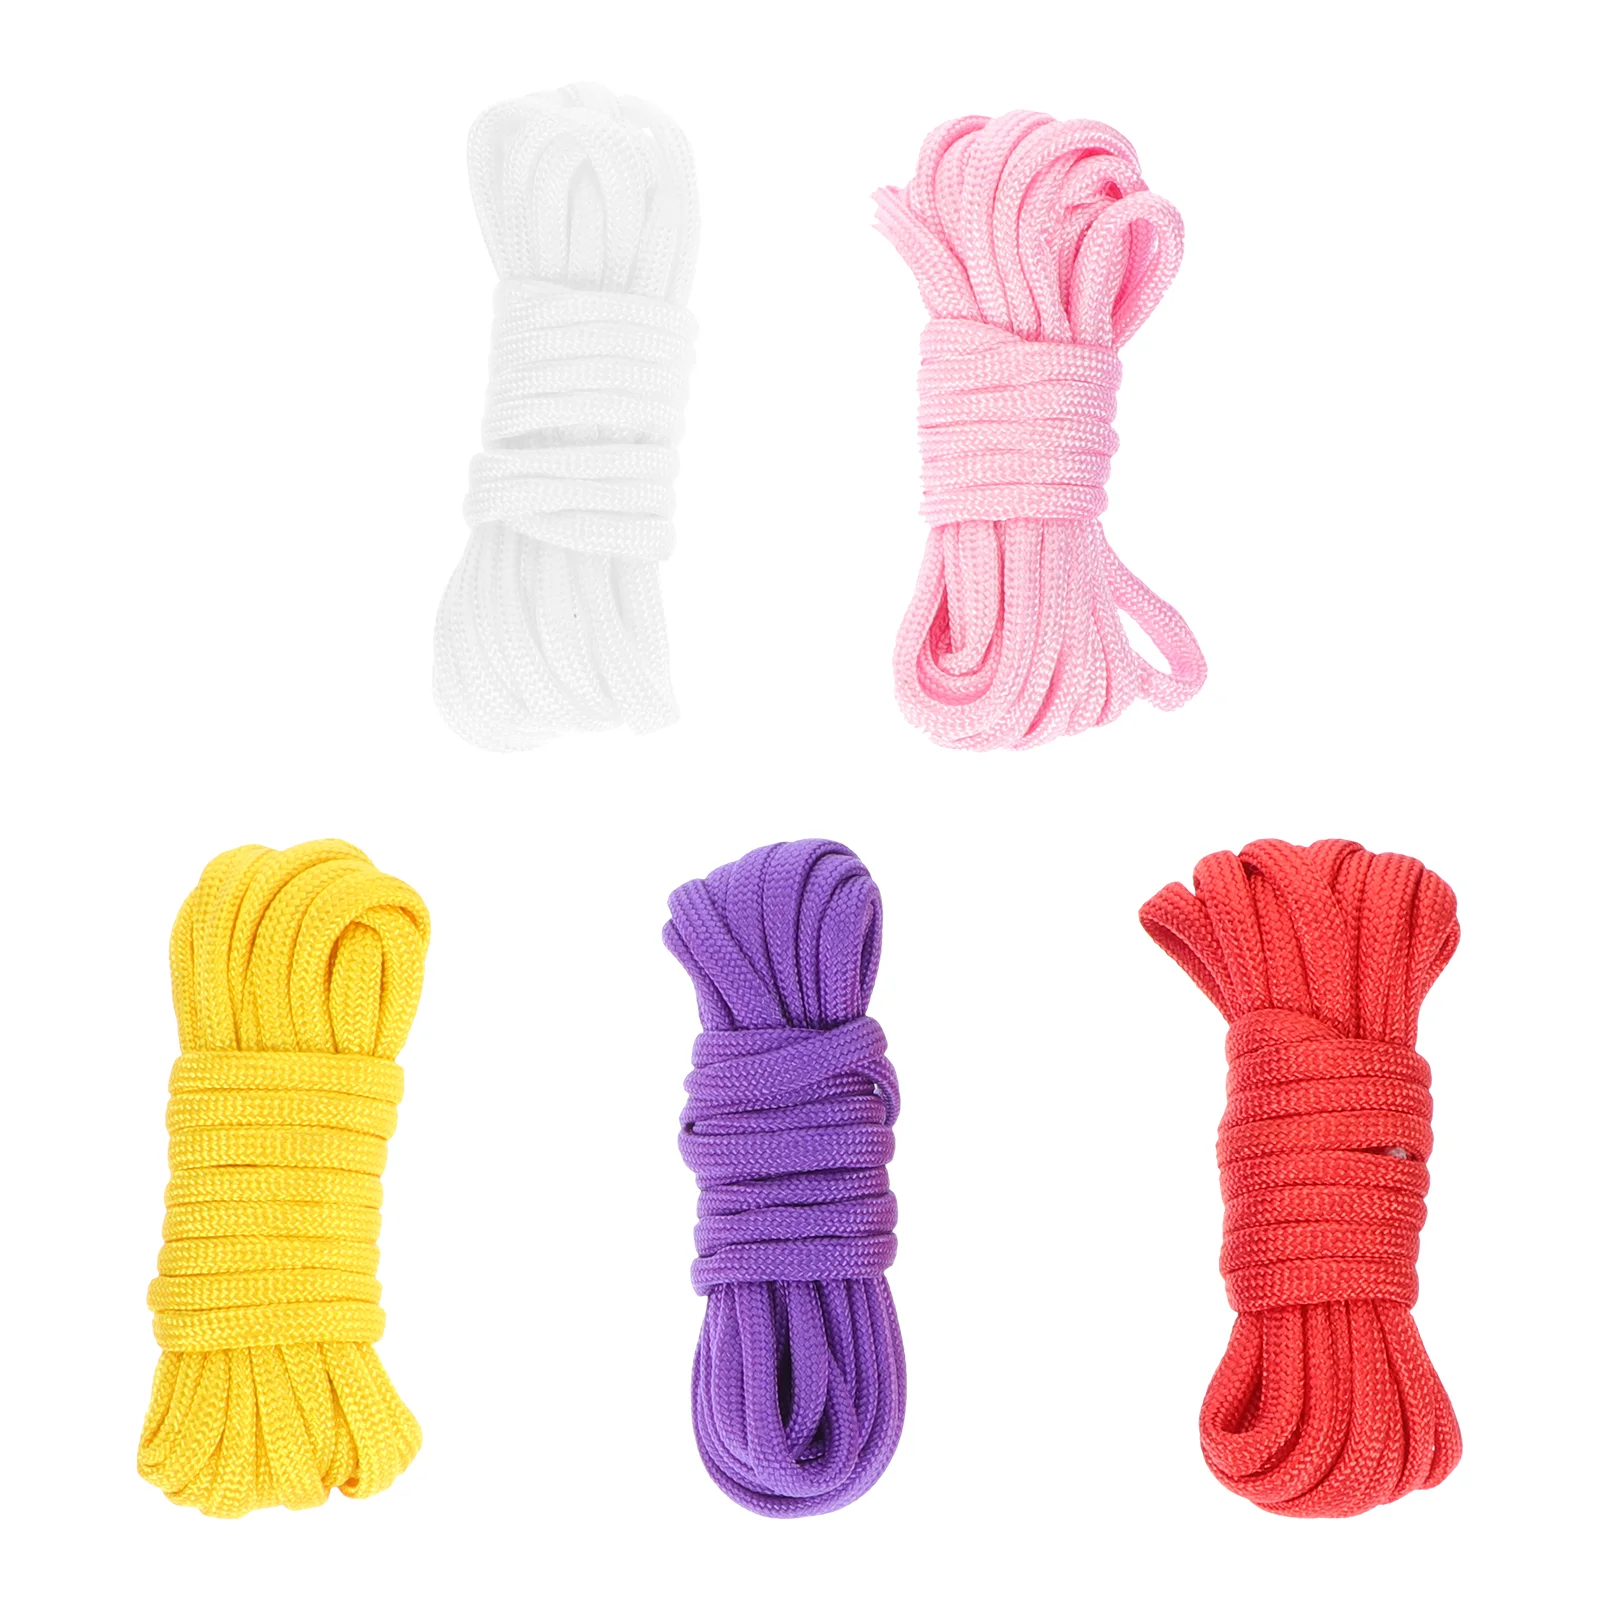 

5 Rolls of Sturdy Climbing Rope Braided Tent Fix Rope Survival Rope Wear-resistant Umbrella Rope